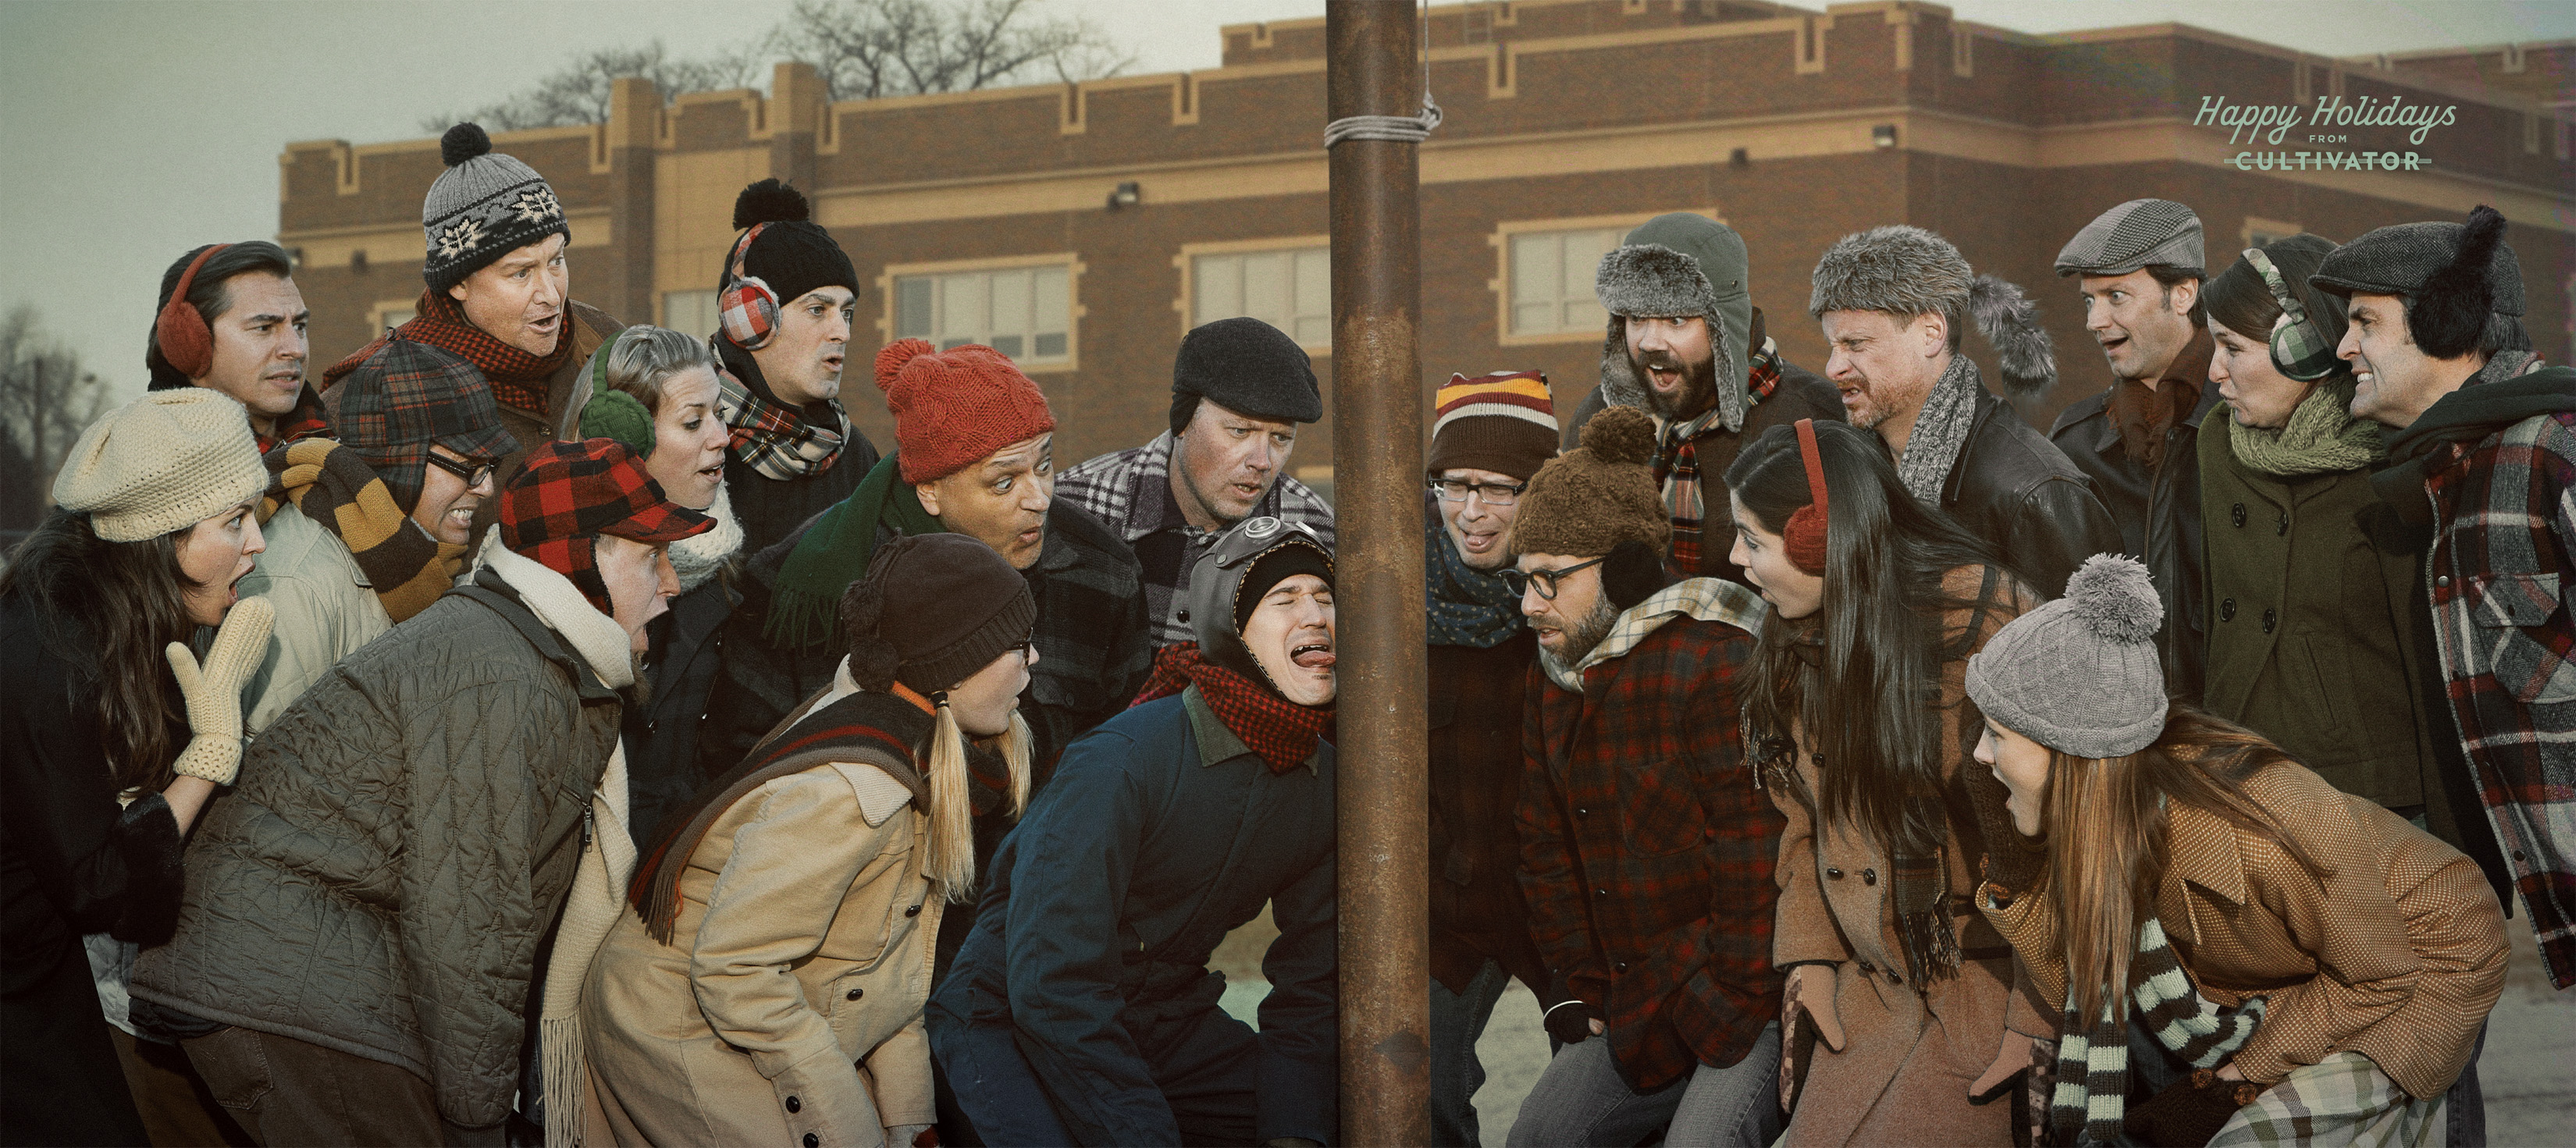 ... Agency's Great Holiday Card Inspired by 'A Christmas Story' | Adweek